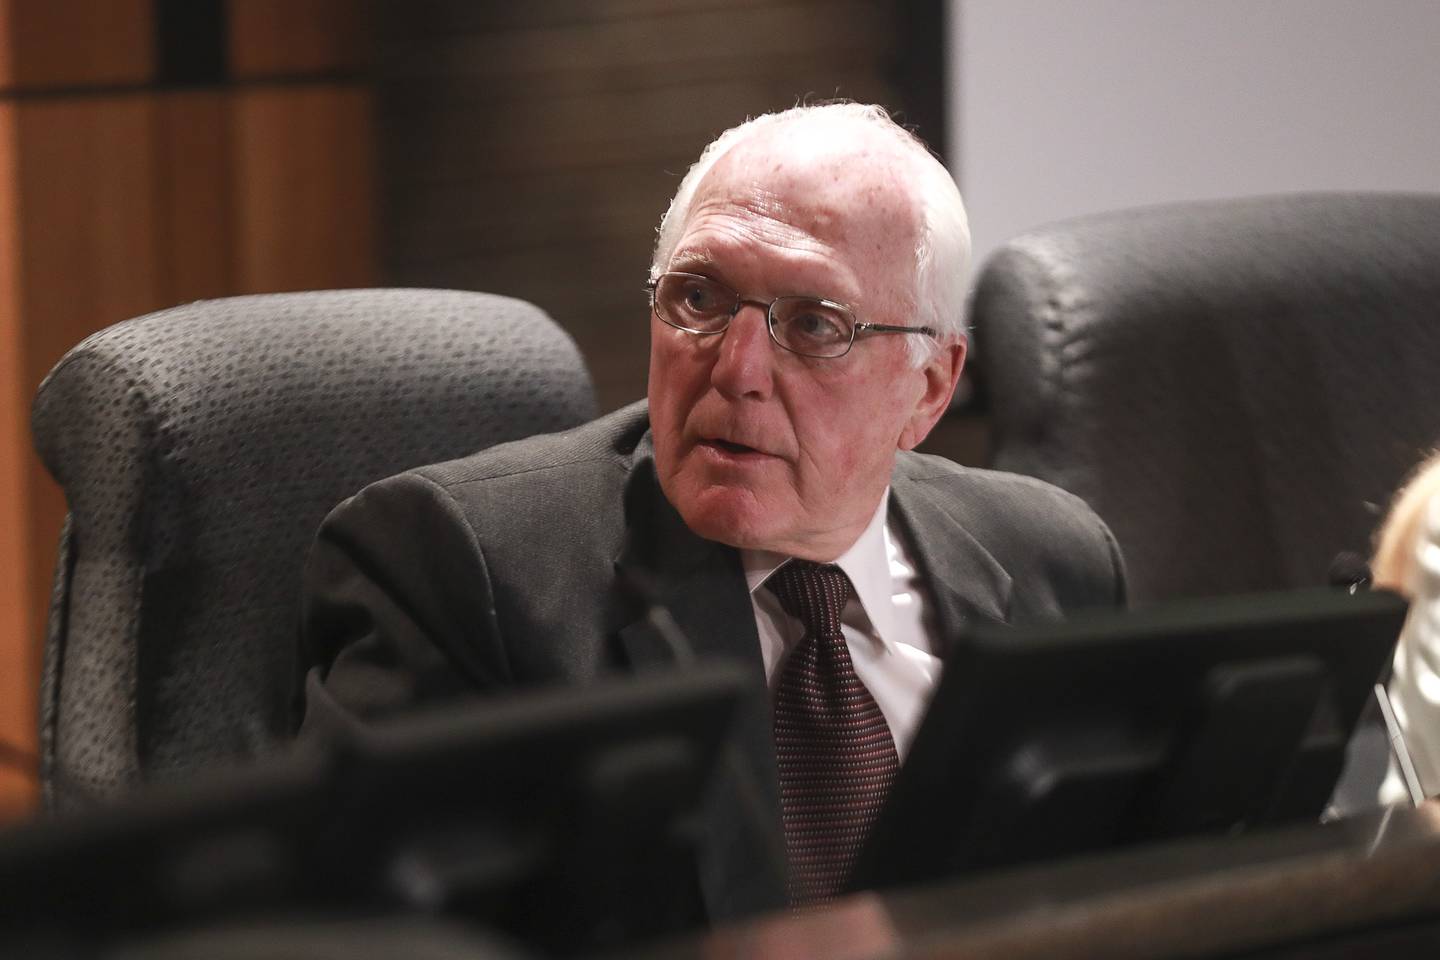 Councilman Pat Mudron discusses tabling a vote on liquor licenses on Tuesday, May 18, 2021, at Joliet City Hall in Joliet, Ill. The Joliet City Council discussed an amendment to allow for liquor consumption and video gambling at gas stations.